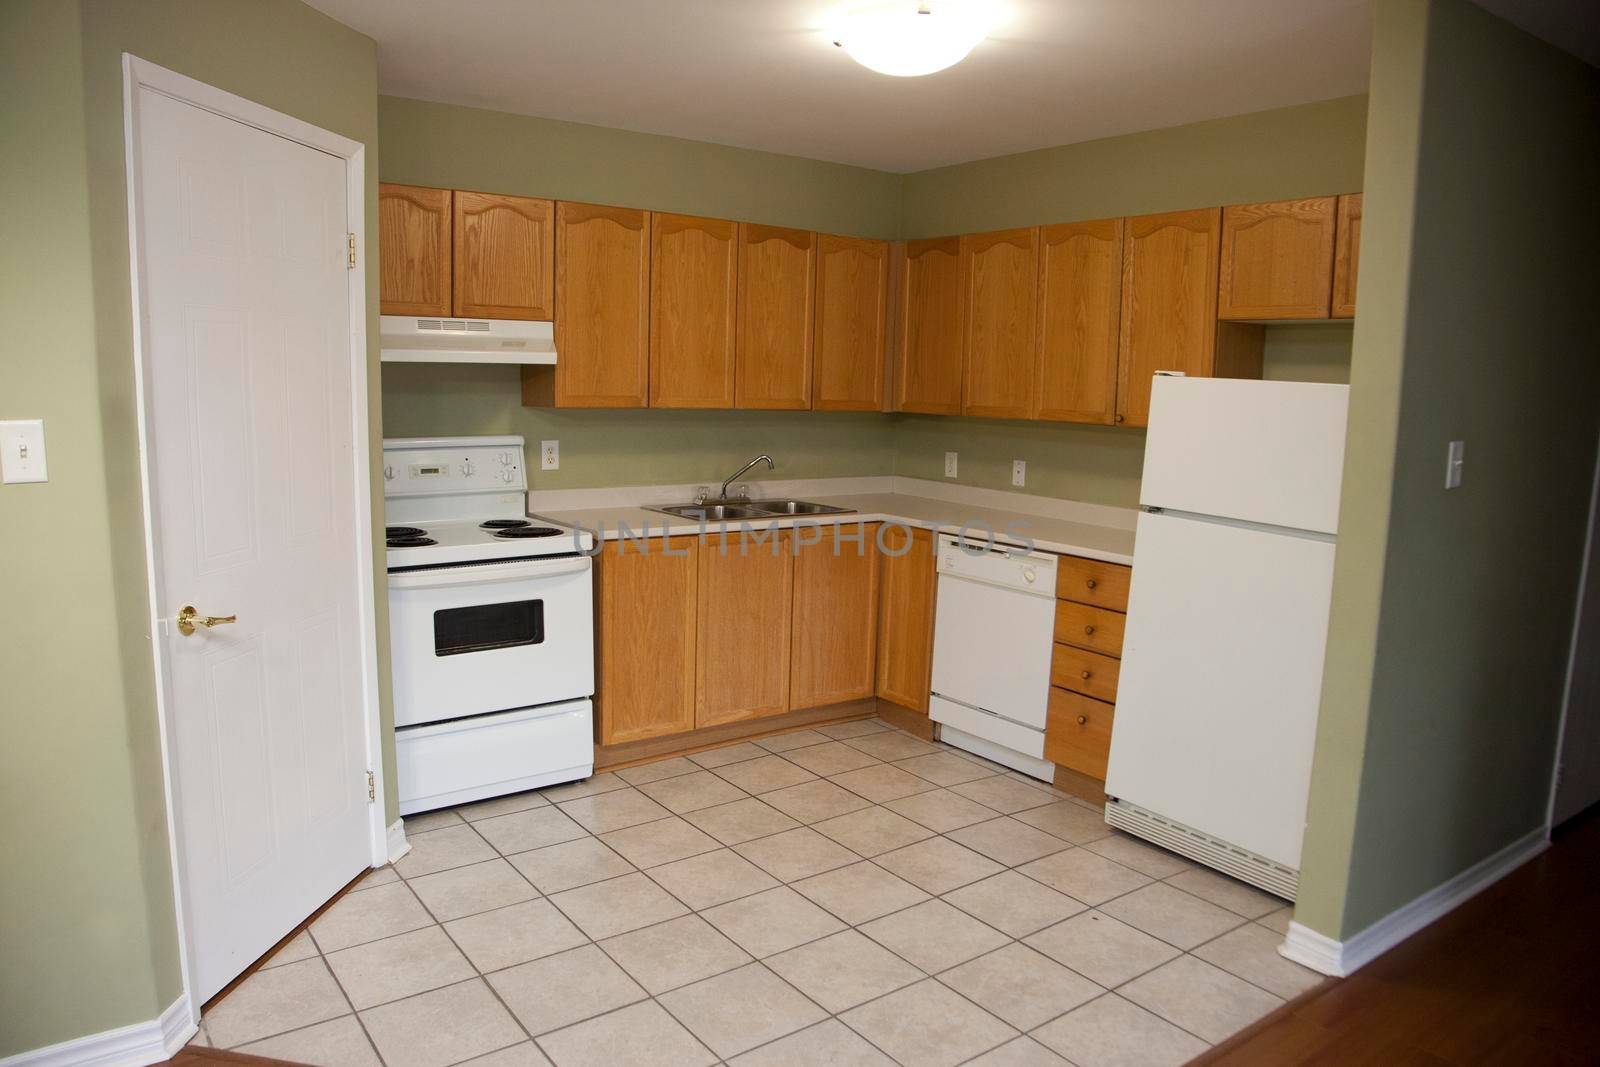 Looking into a small empty kitchen with stove, fridge and cupboards